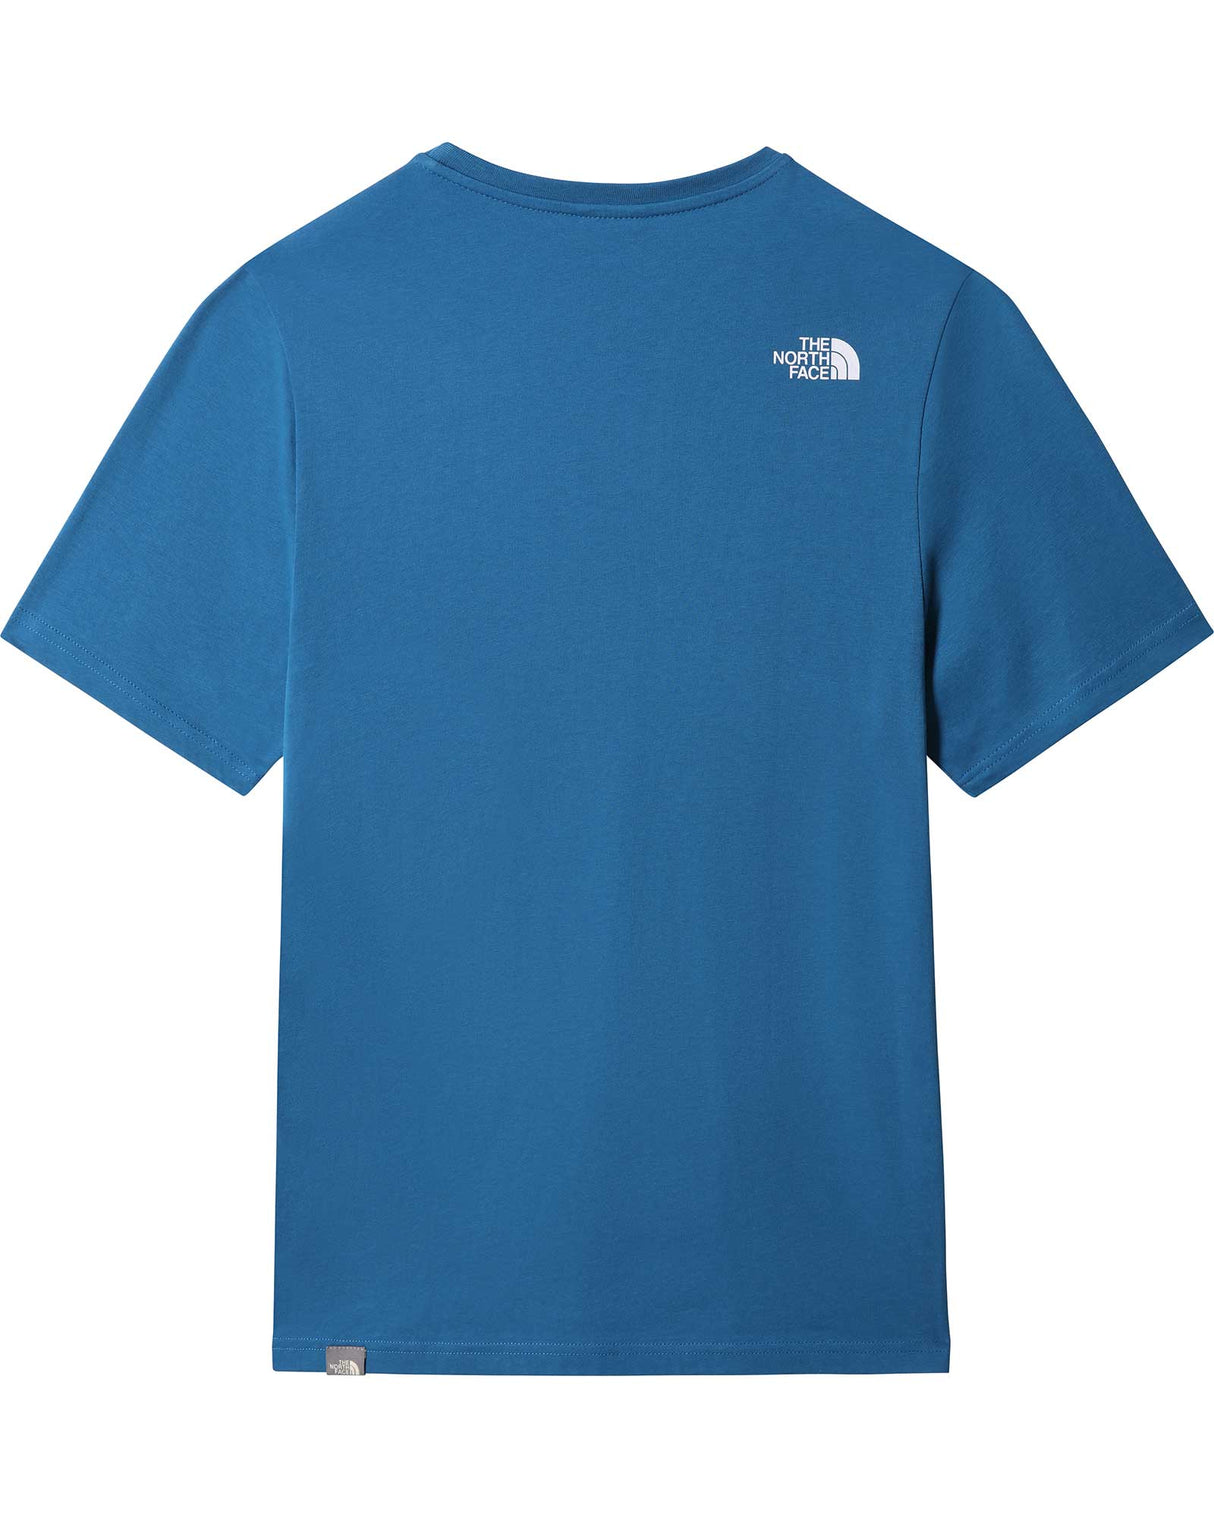 Men’s The North Face Short Sleeve Simple Dome T-Shirt in Banff Blue